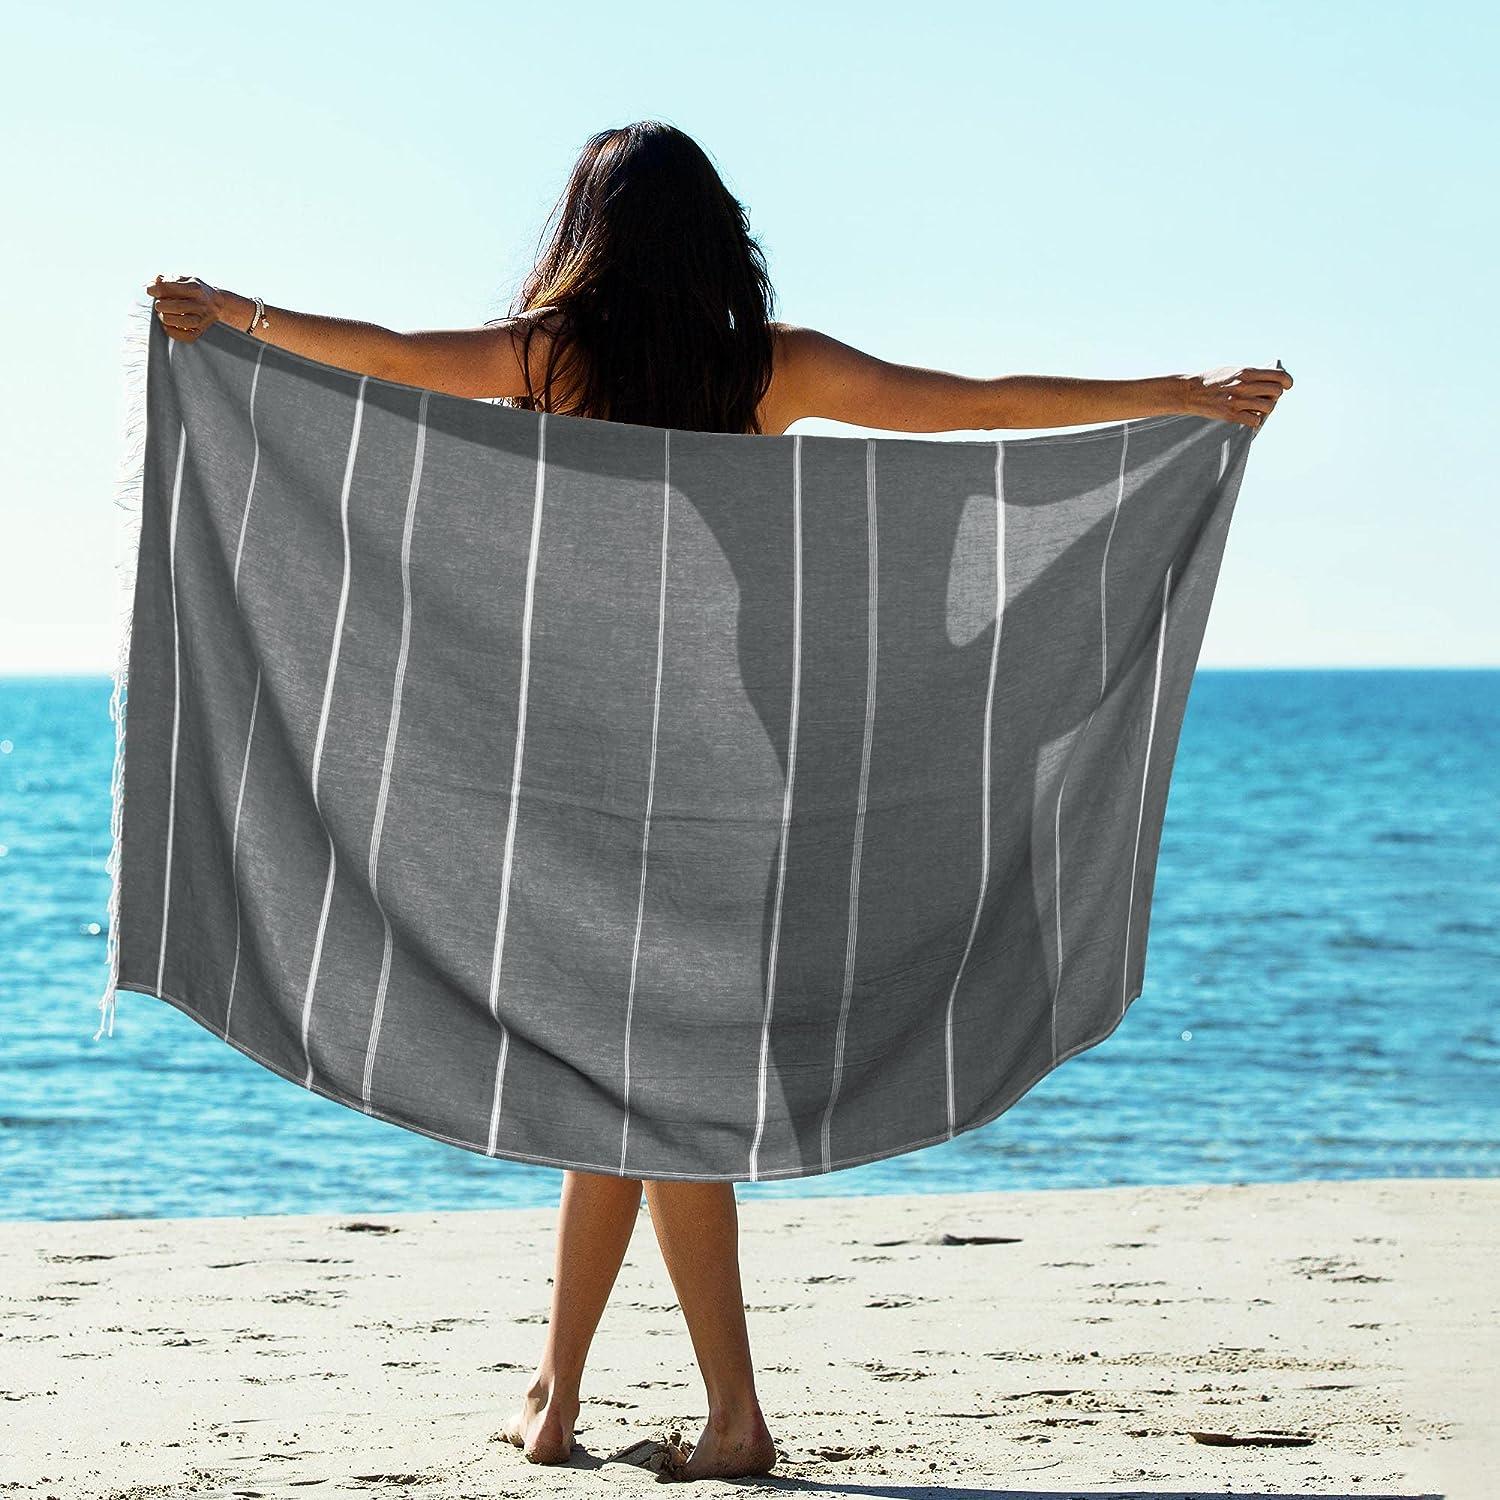 2 Packs Cotton Turkish Beach Towels Sand Free Quick Dry Oversized